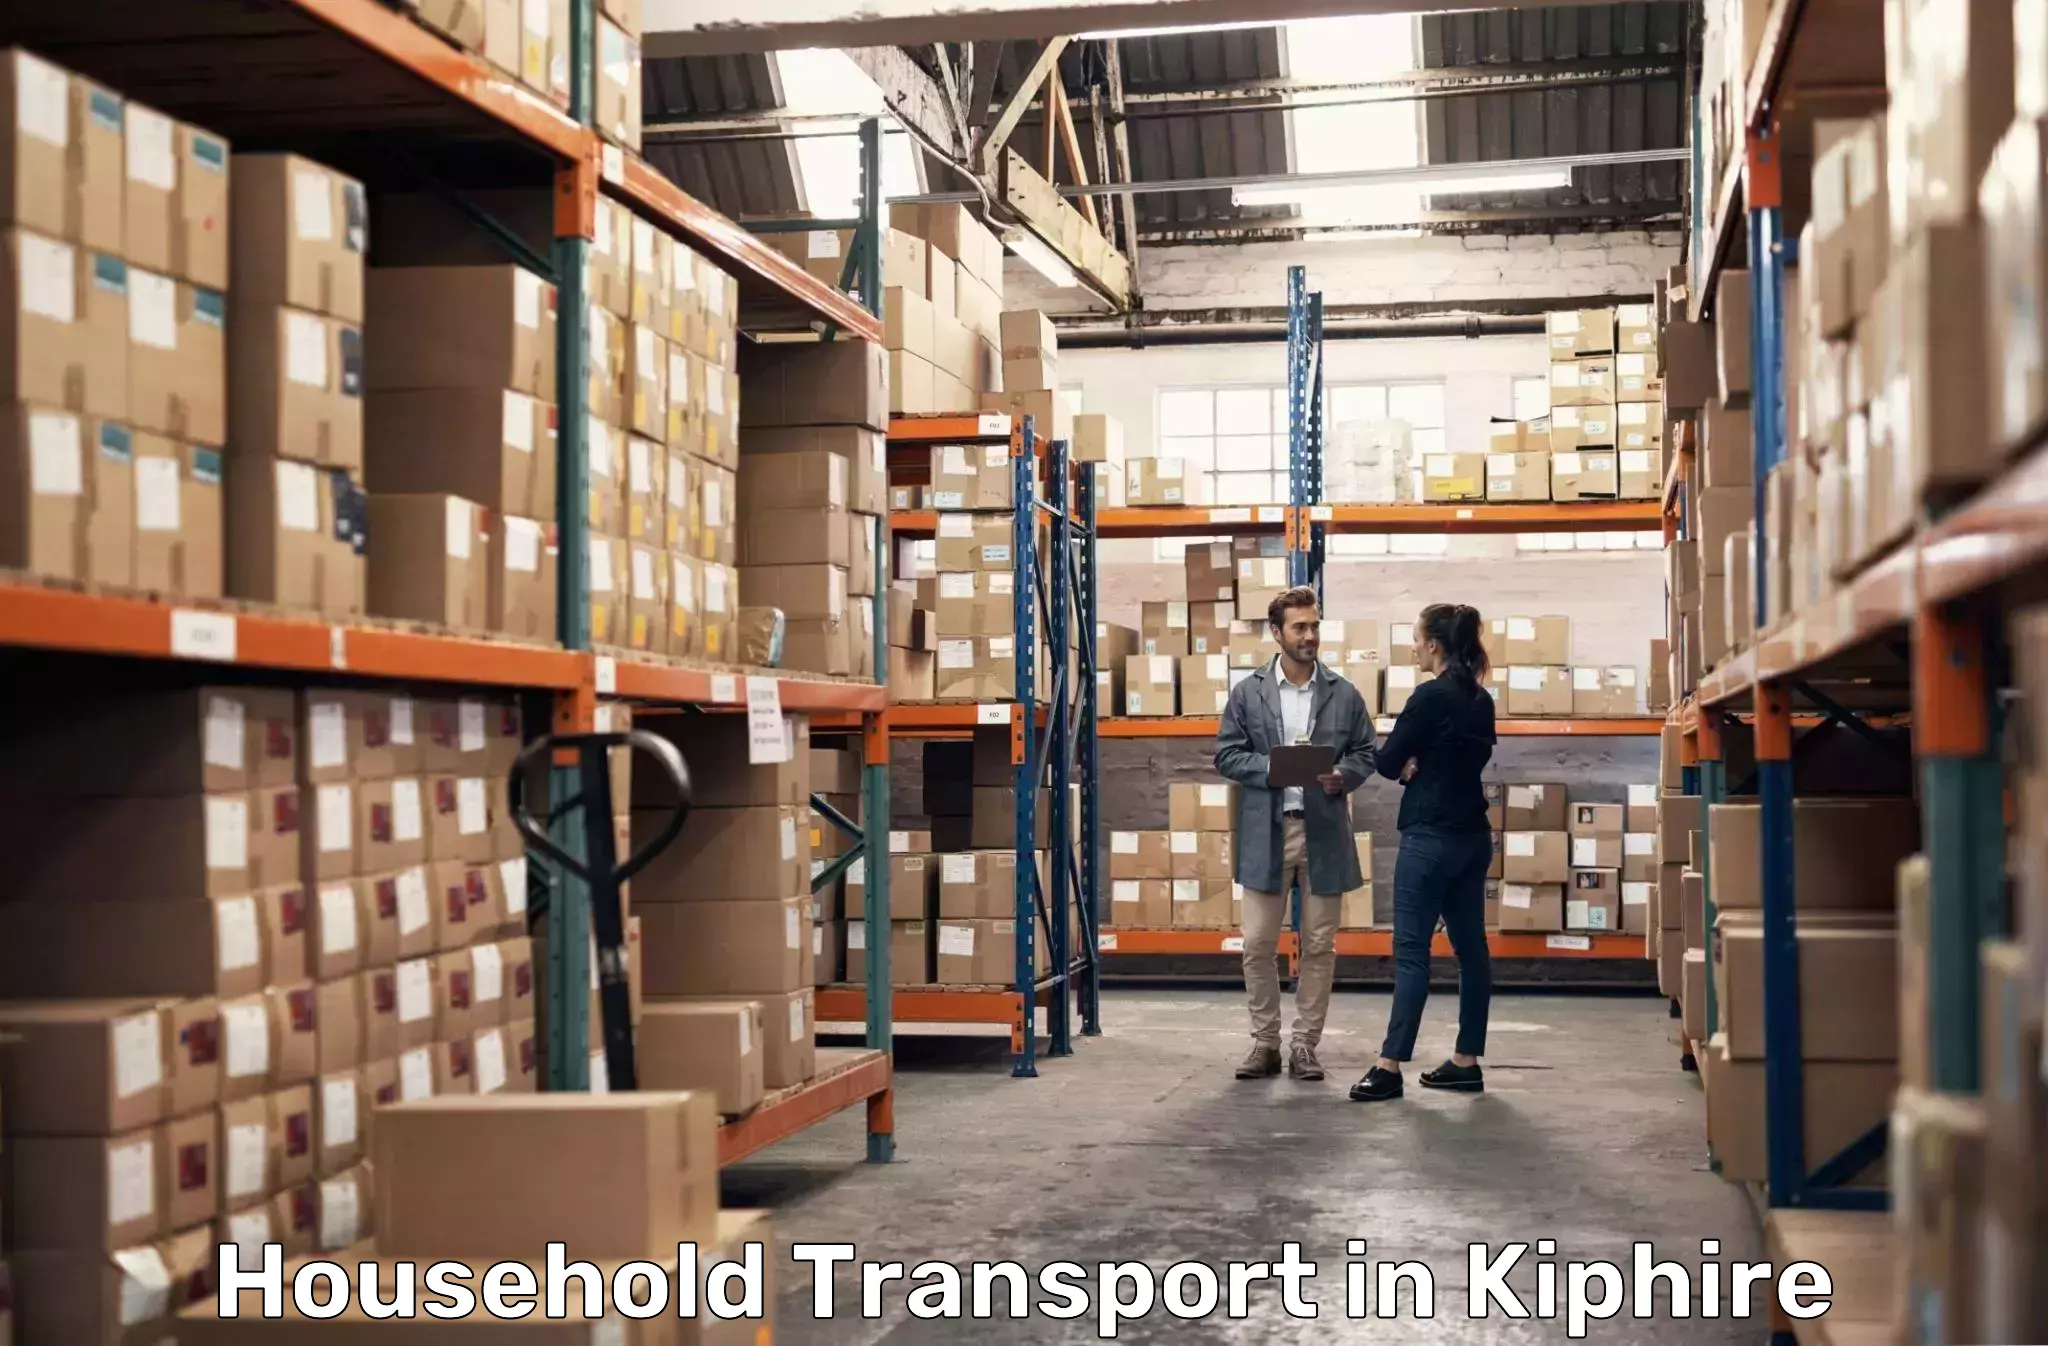 Home shifting experts in Kiphire